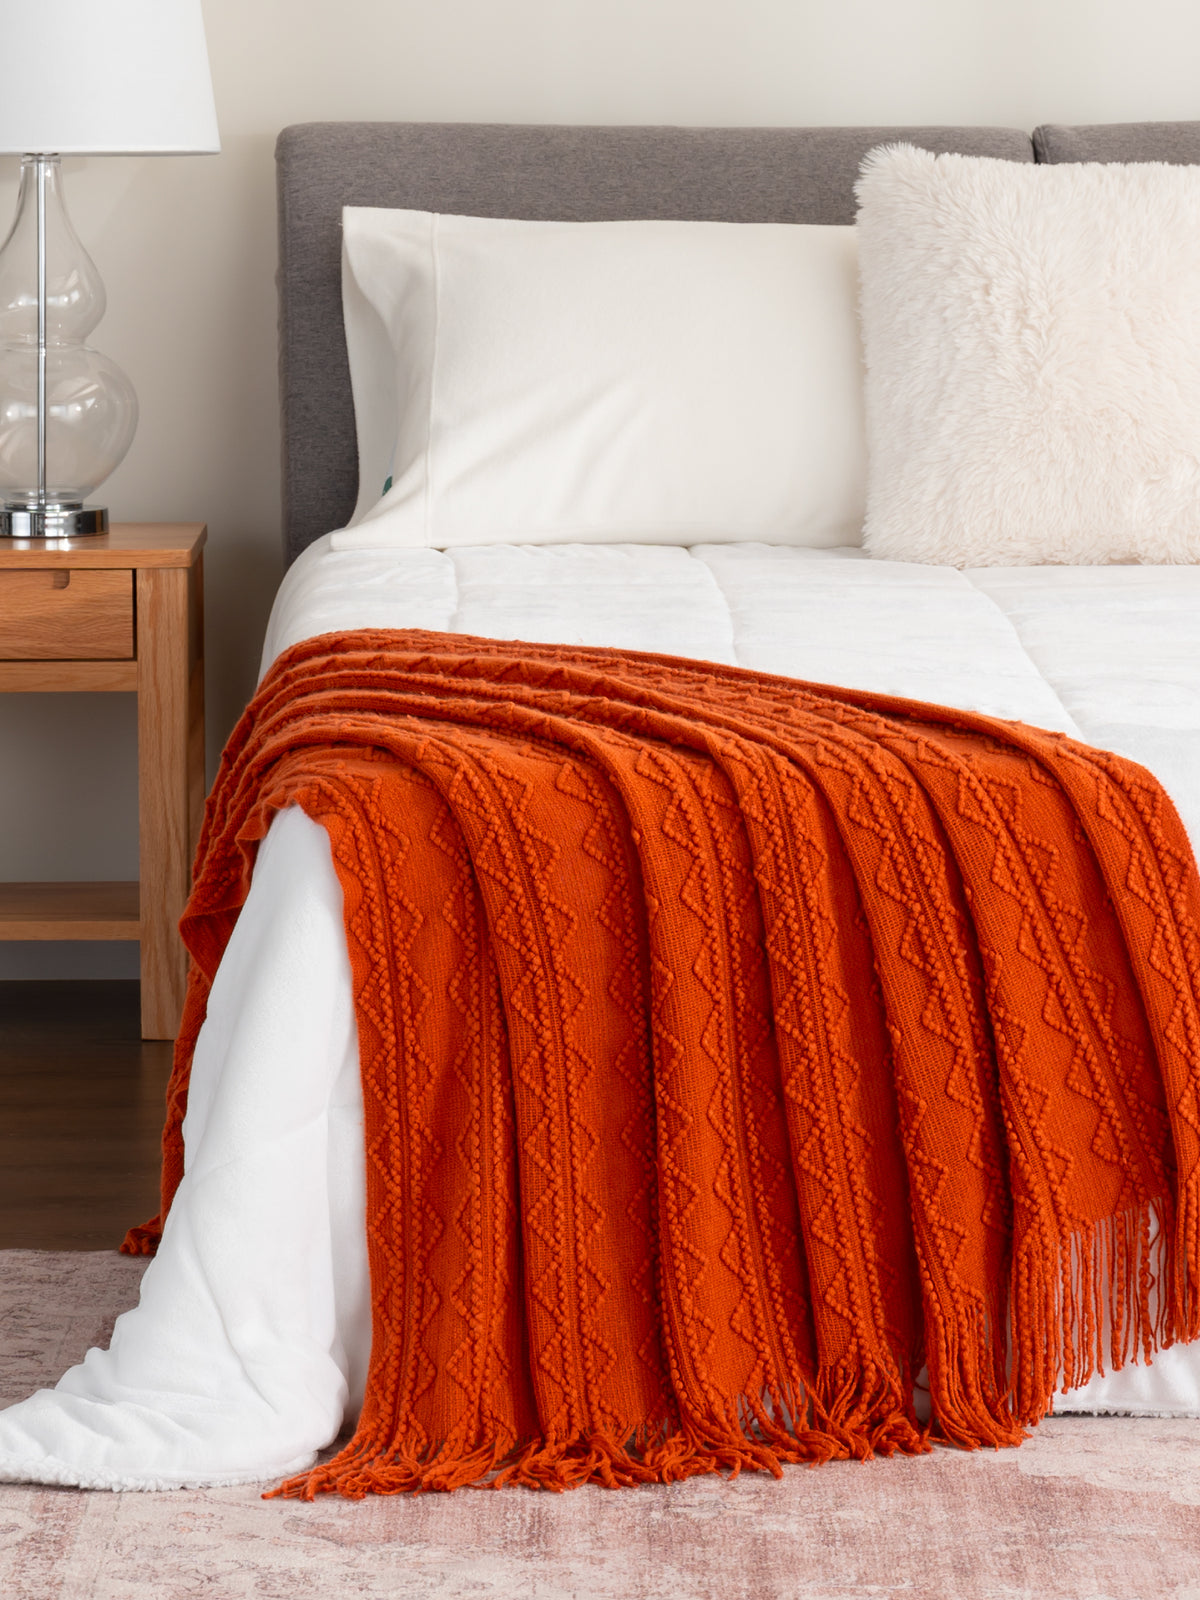 Throws collection image featuring our NEW Tassle Knit Throw in Pumpkin Puree draped over a white bed!